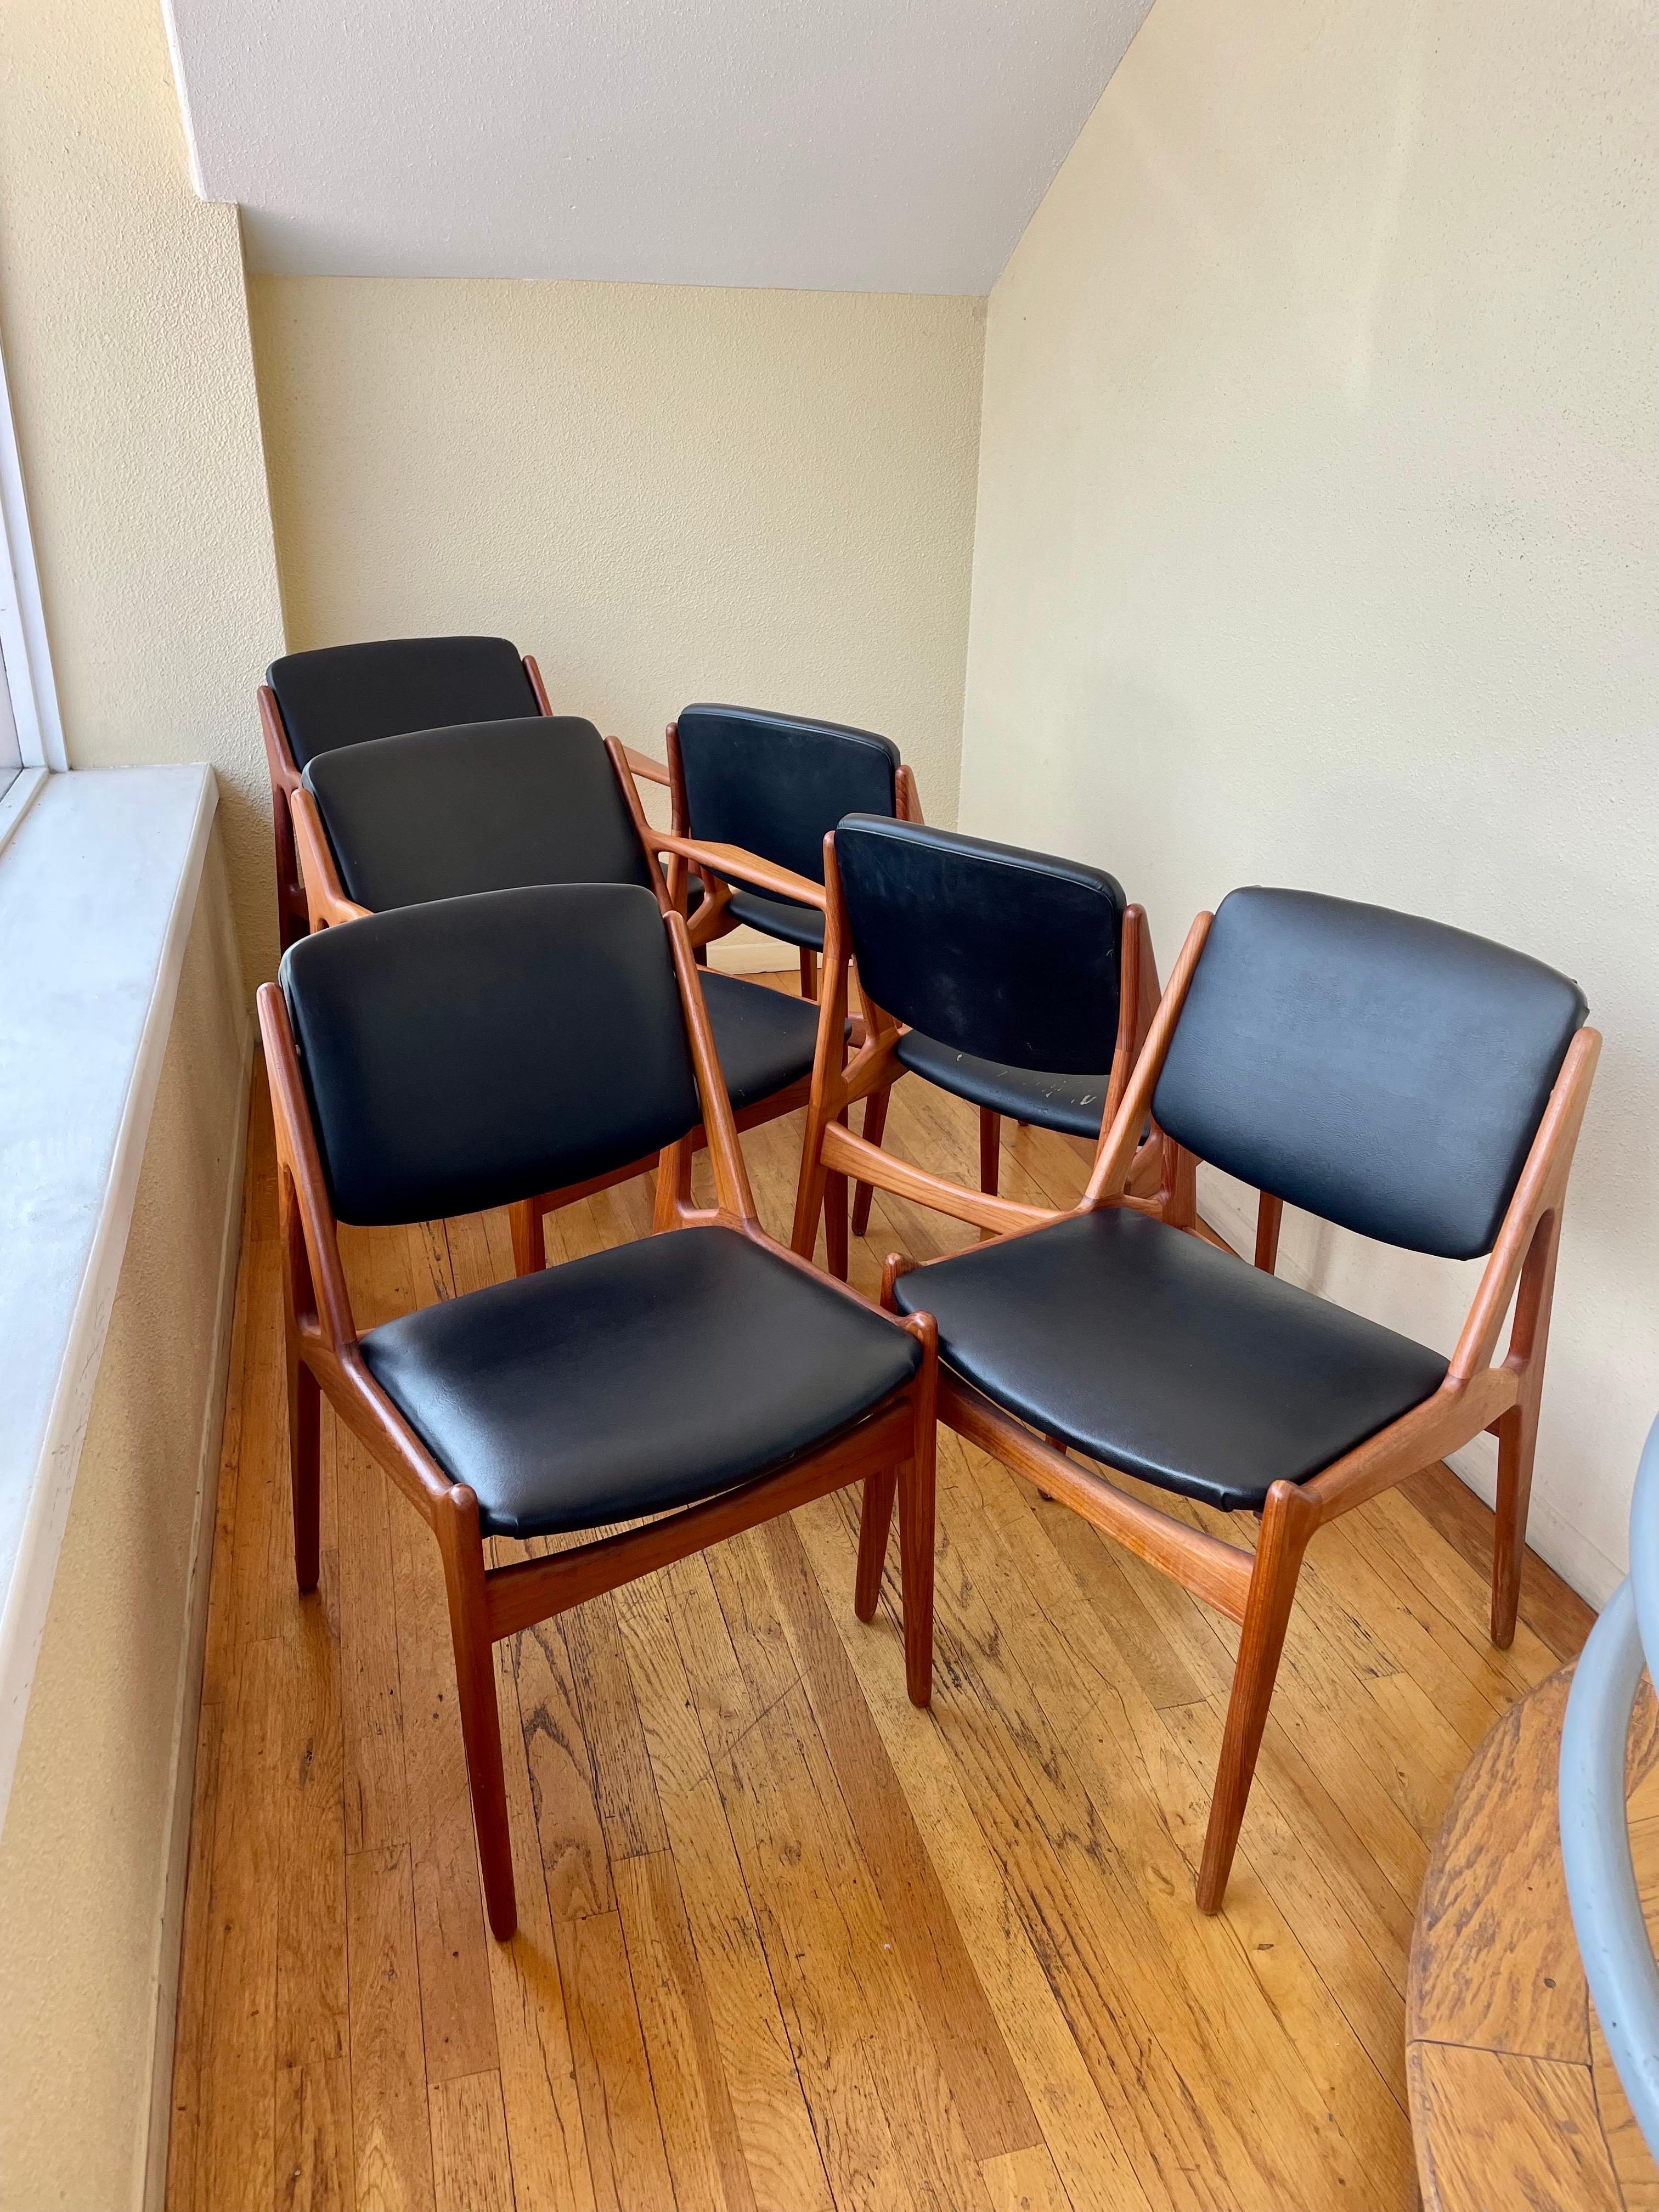 A striking set of six dining chairs 2 armchairs and 4 armless chairs by Arne Vodder for Vamo in solid teak frames, with freshly recover Naugahyde seats and backrest, great condition chairs are solid and sturdy.